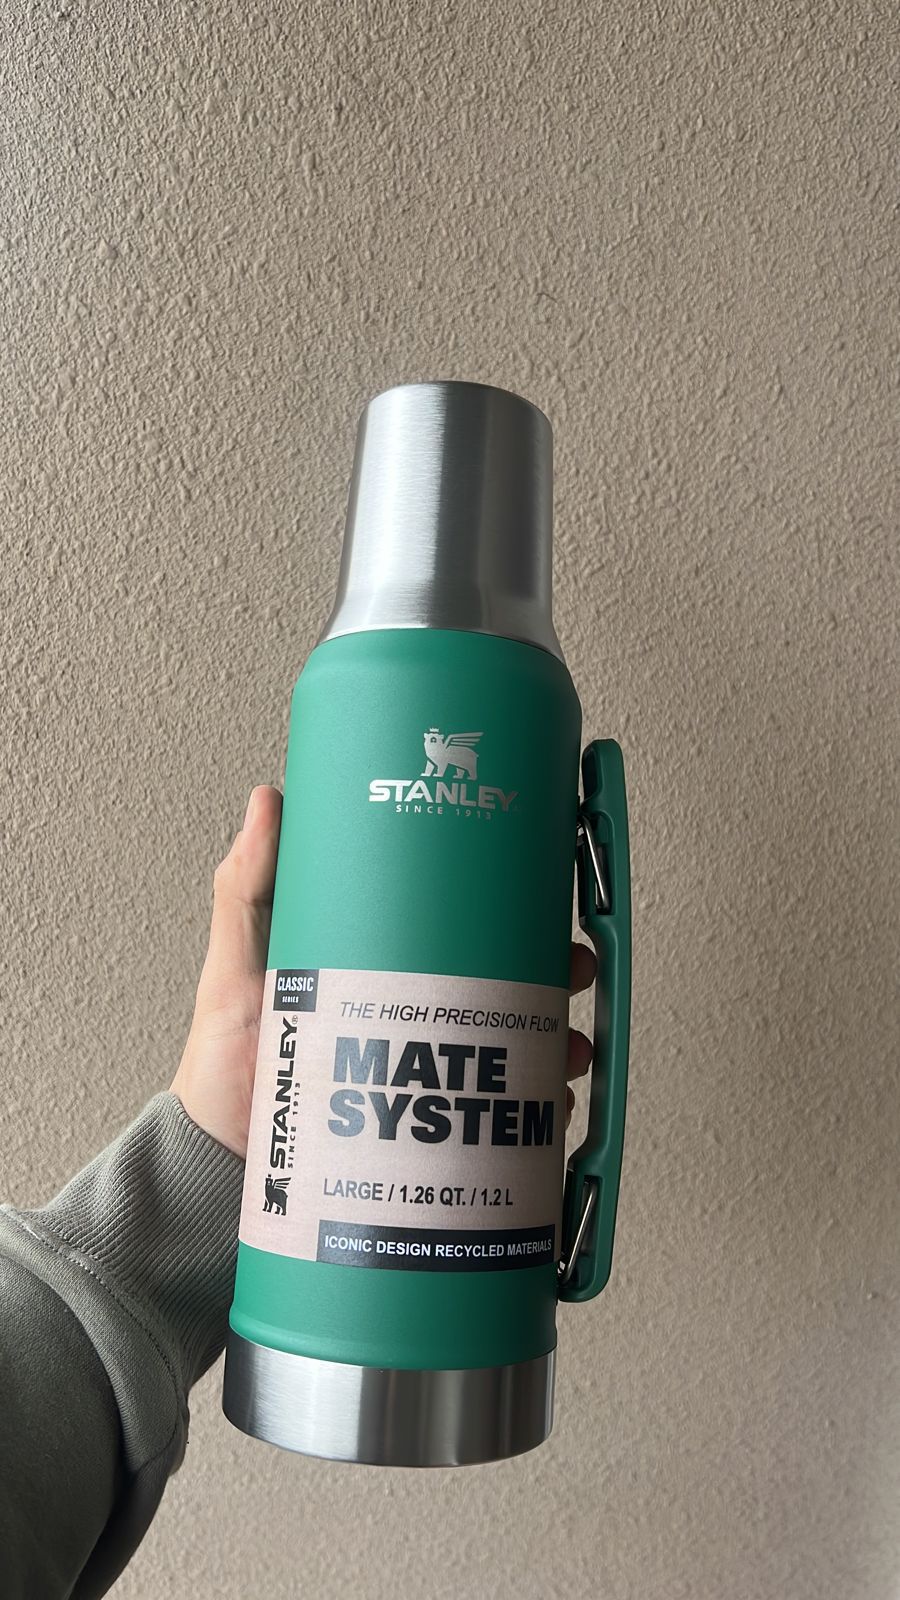 MATE SYSTEM - Termo 2 en 1